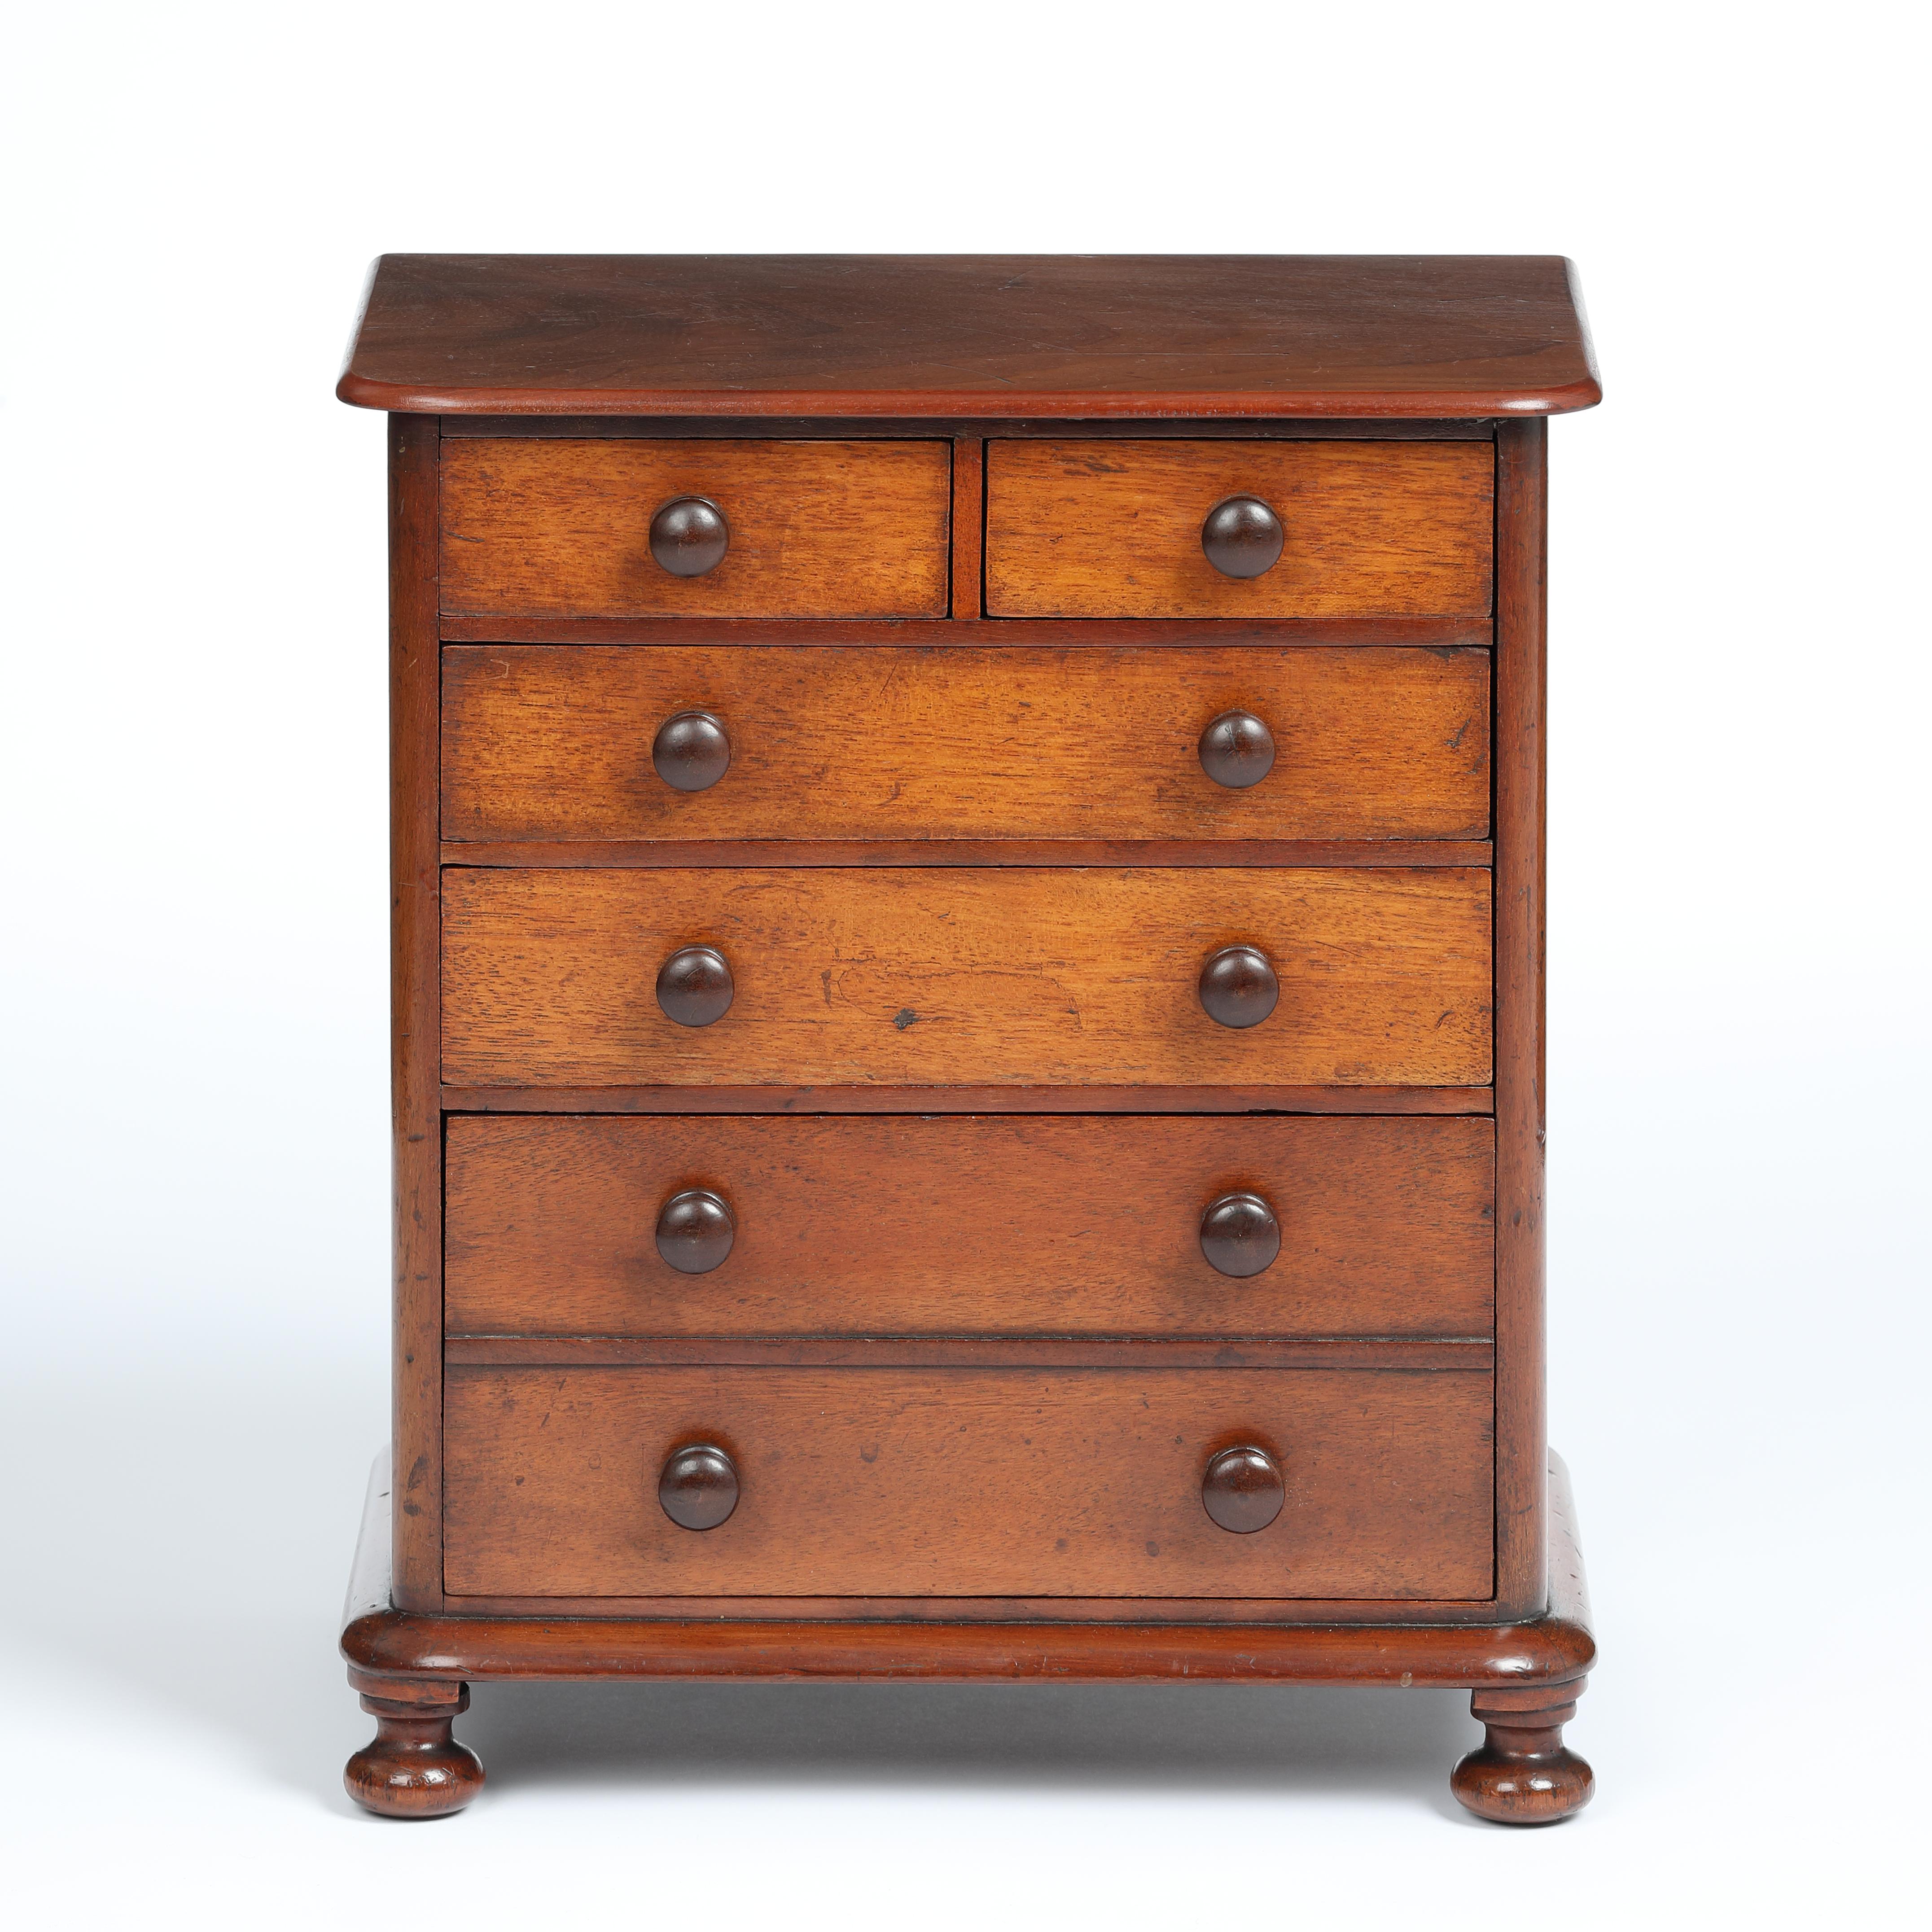 A fine quality and well proportioned mahogany miniature chest of five long graduated drawers in fine original condition. Superbly constructed with the neatest, tiny dovetail joints to the cedar wood lined drawers, which have chamfered-edge bottoms